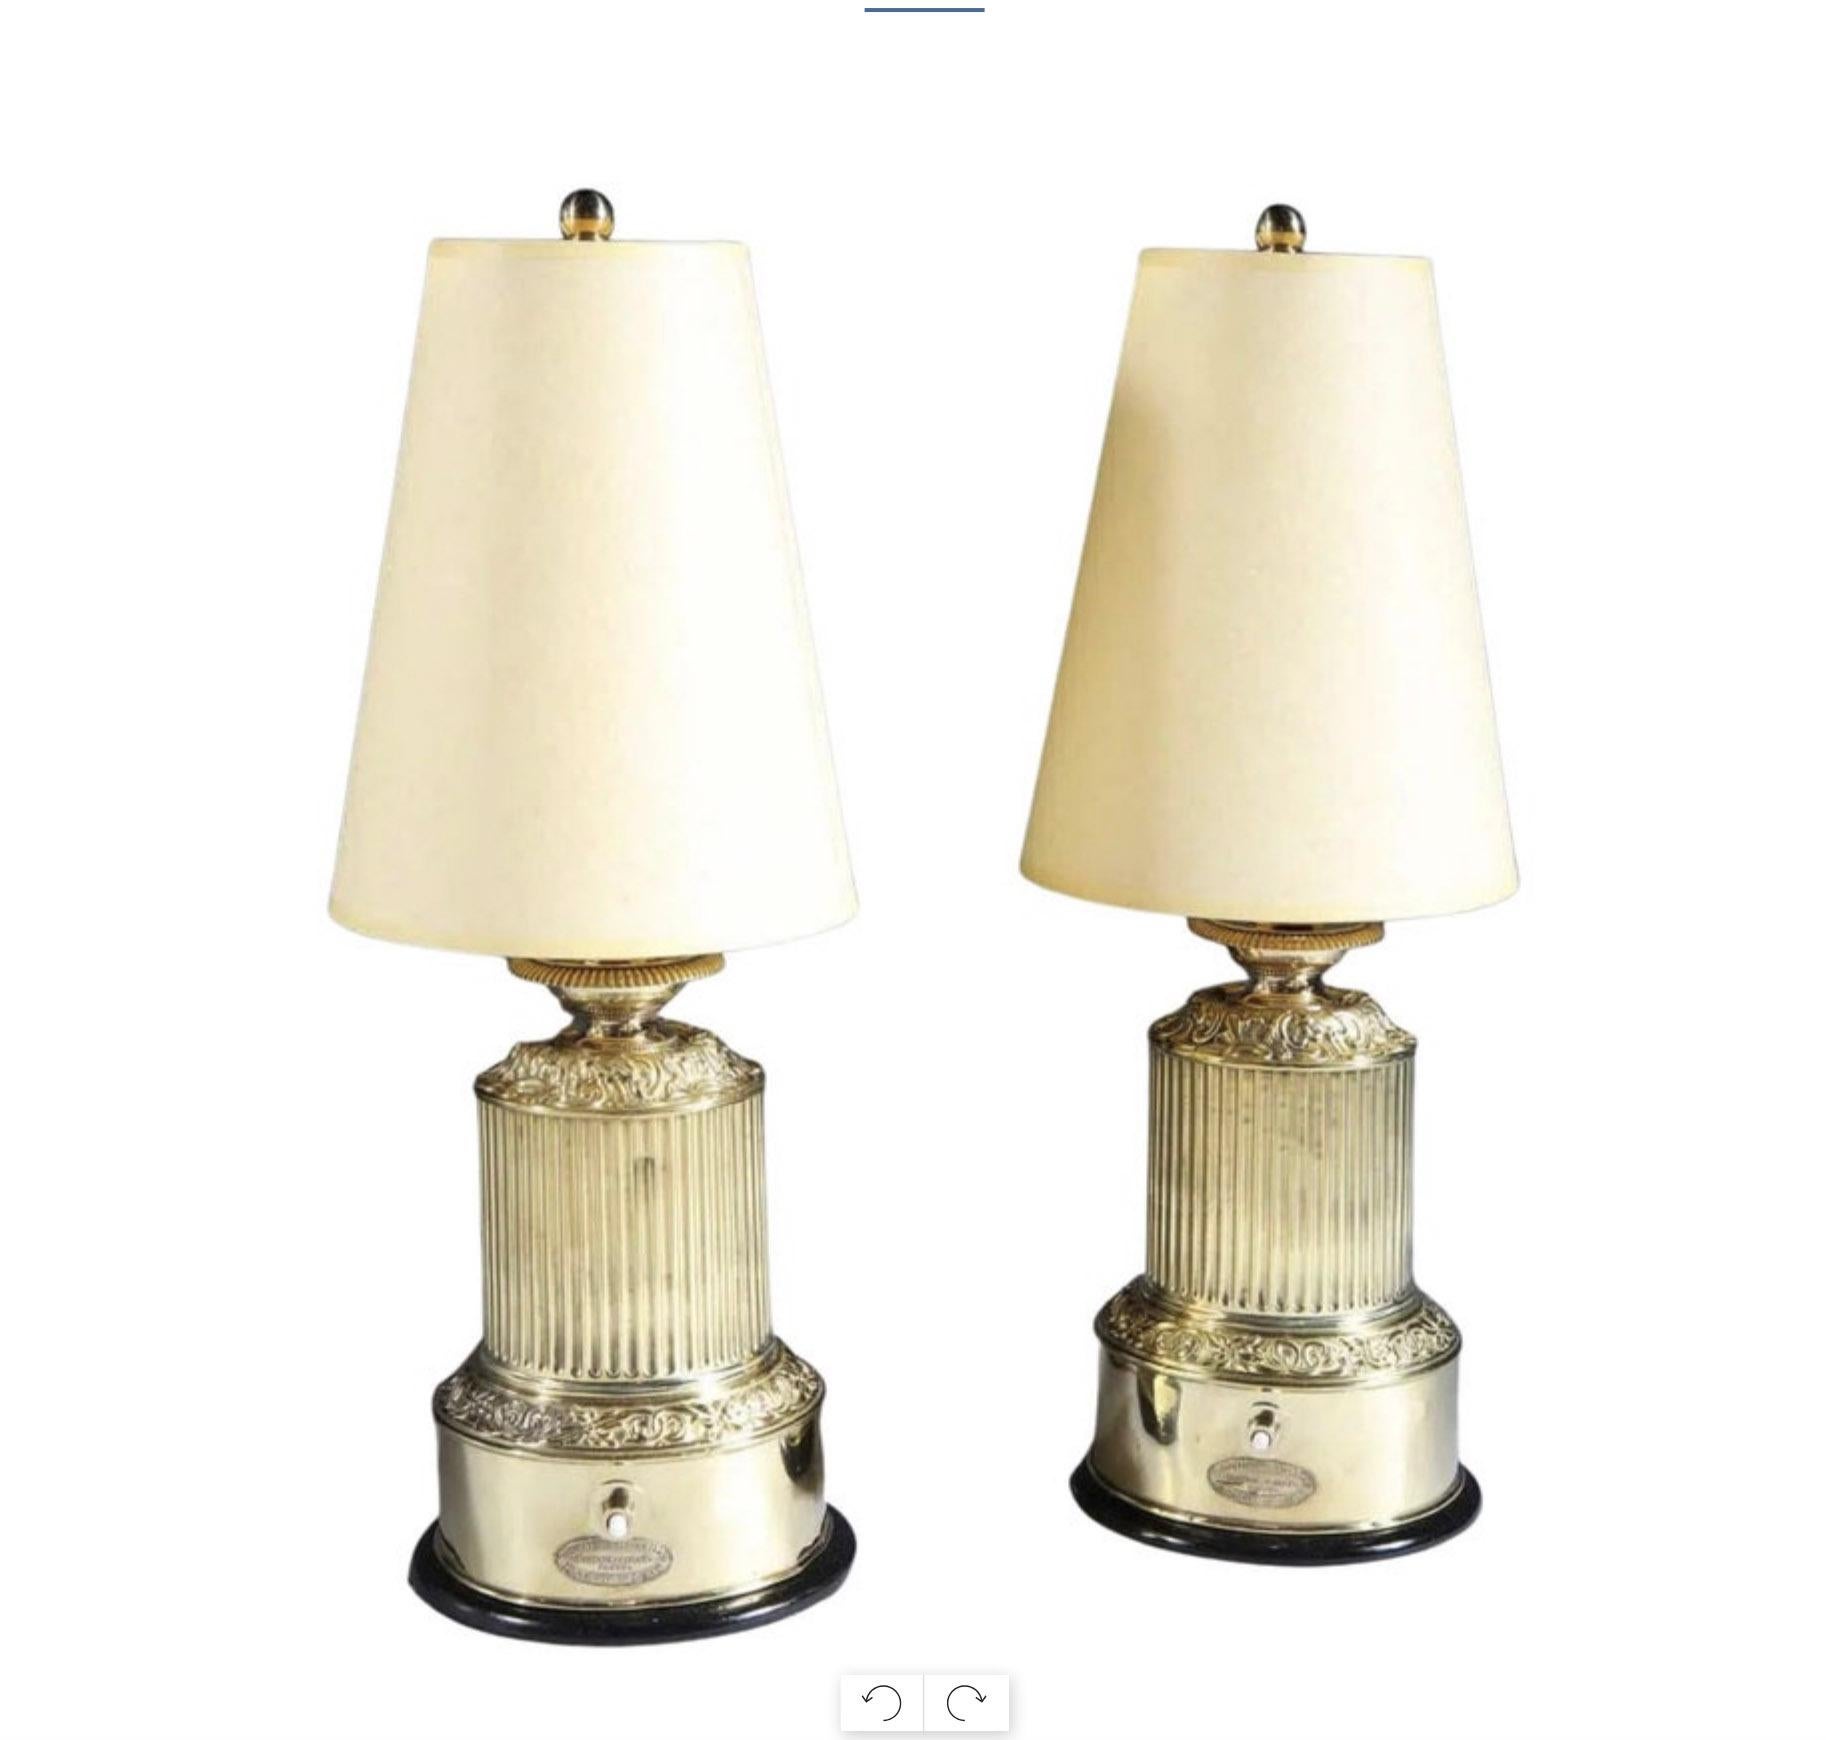 Pair of French Polished Brass Antique Table Lamps, 19th Century In Good Condition For Sale In London, by appointment only